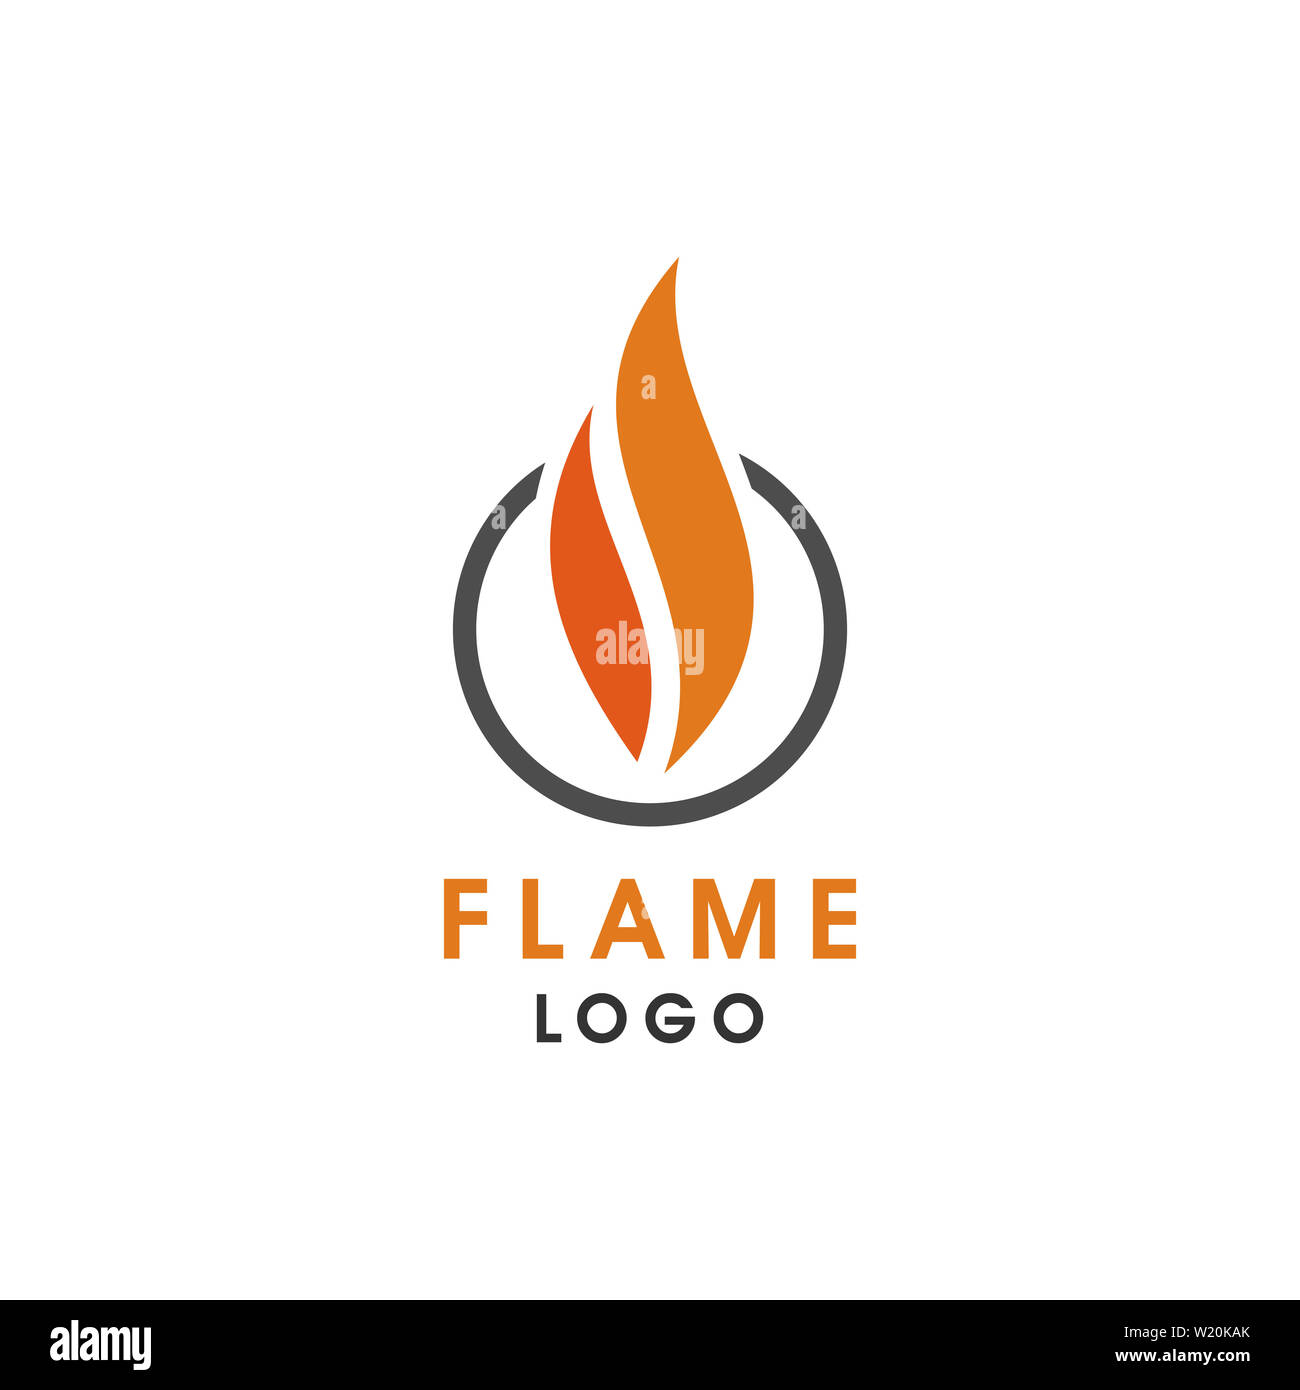 flame or fire logo design with simple style Stock Photo